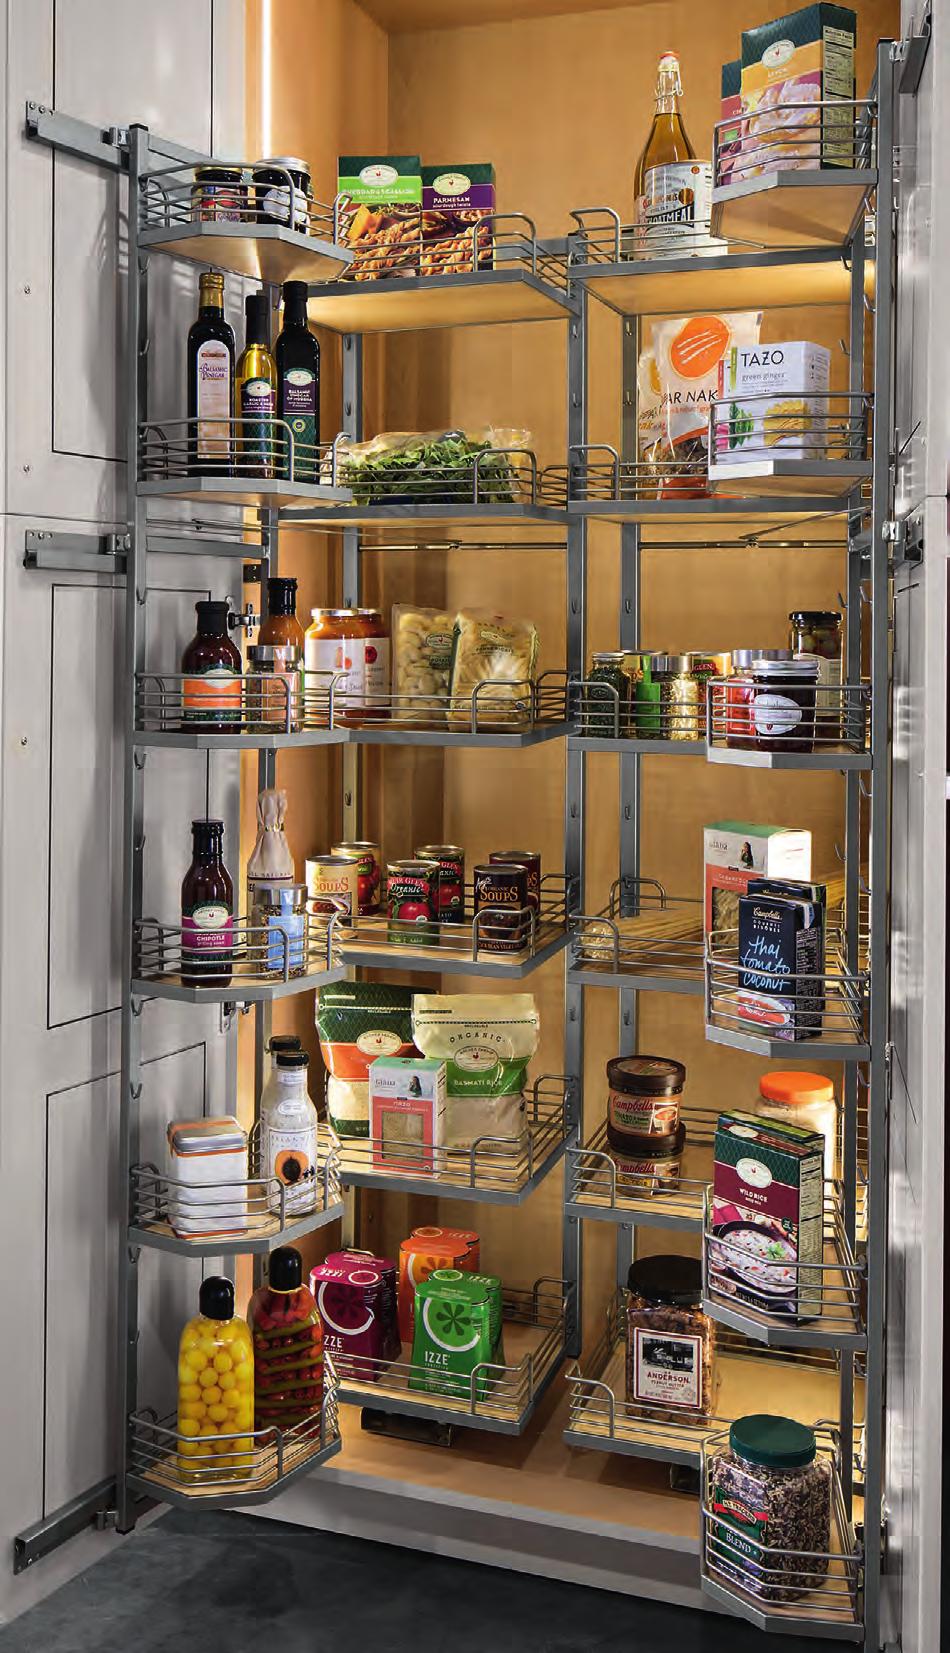 TALL TANDEM PANTRY Technical Information B B REAR SHELF 22 1 / 2 " 24" (571 609 mm) REAR SHELF 22 1 / 2 " 24" (571 609 mm) DOOR SHELF DOOR SHELF Notes: works with overlay and inset doors shelves